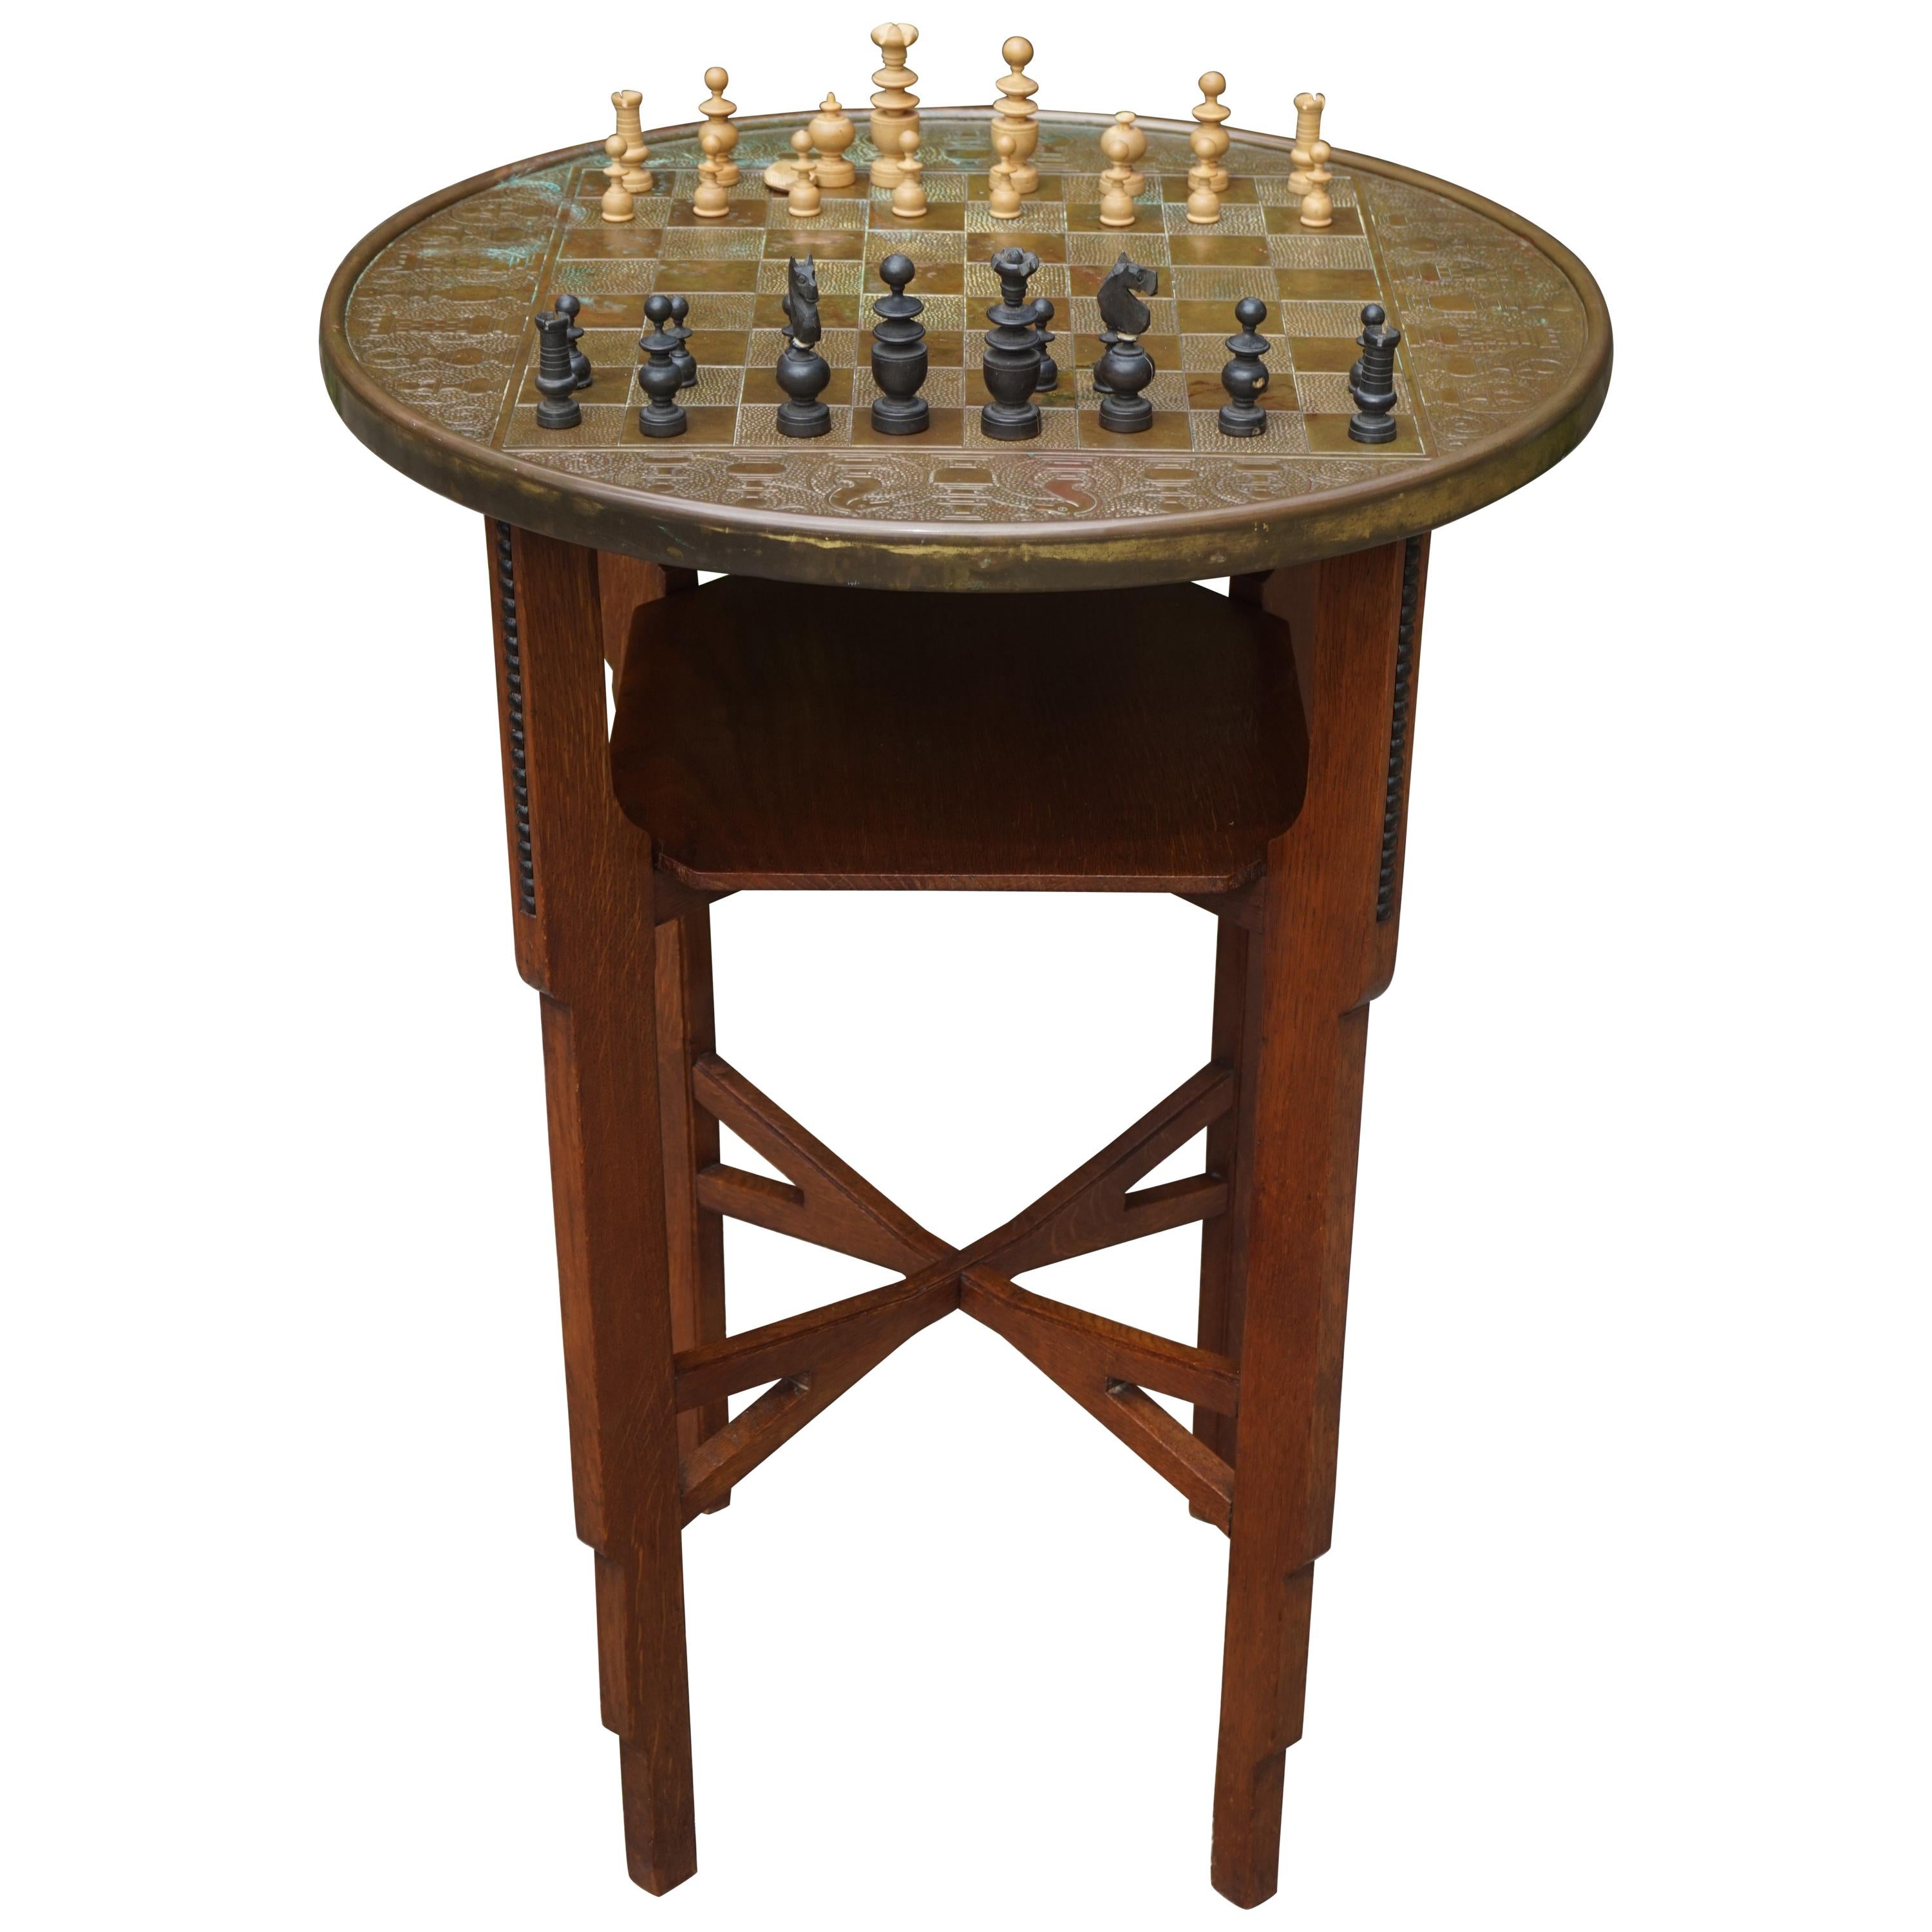 Early 1900s Dutch Arts and Crafts Chess Table with Embossed Brass Chess Pieces